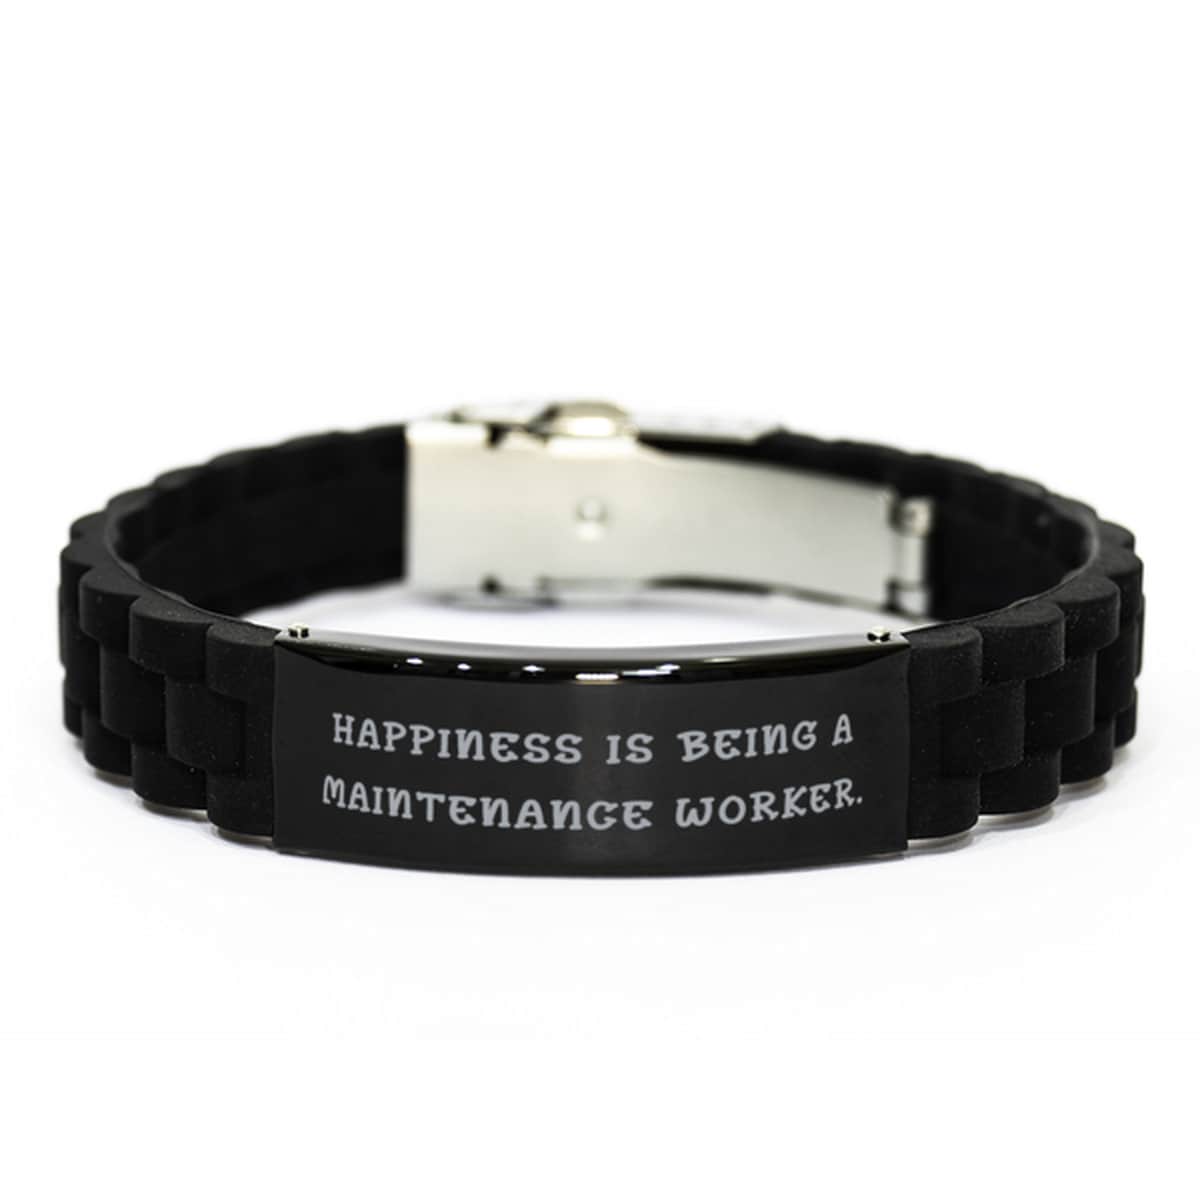 Happiness Is Being A Maintenance Worker. Funny Gifts For Friends Holiday Gifts Reusable Maintenance Worker Black Glidelock Clasp Bracelet